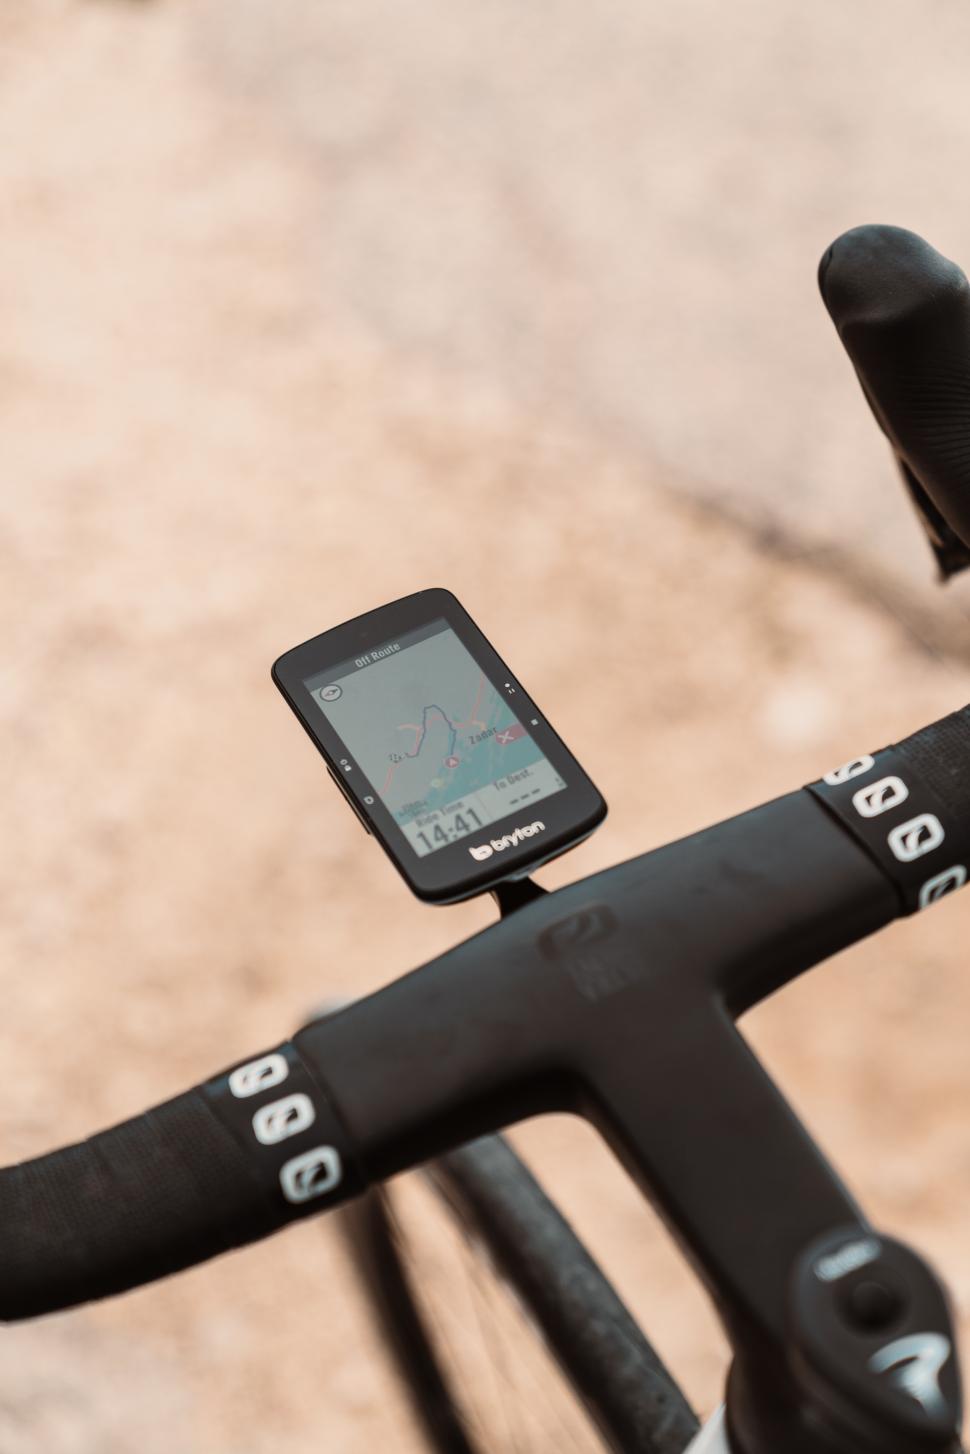 Bryton's new flagship Rider S800 cycle computer has 36 hours of